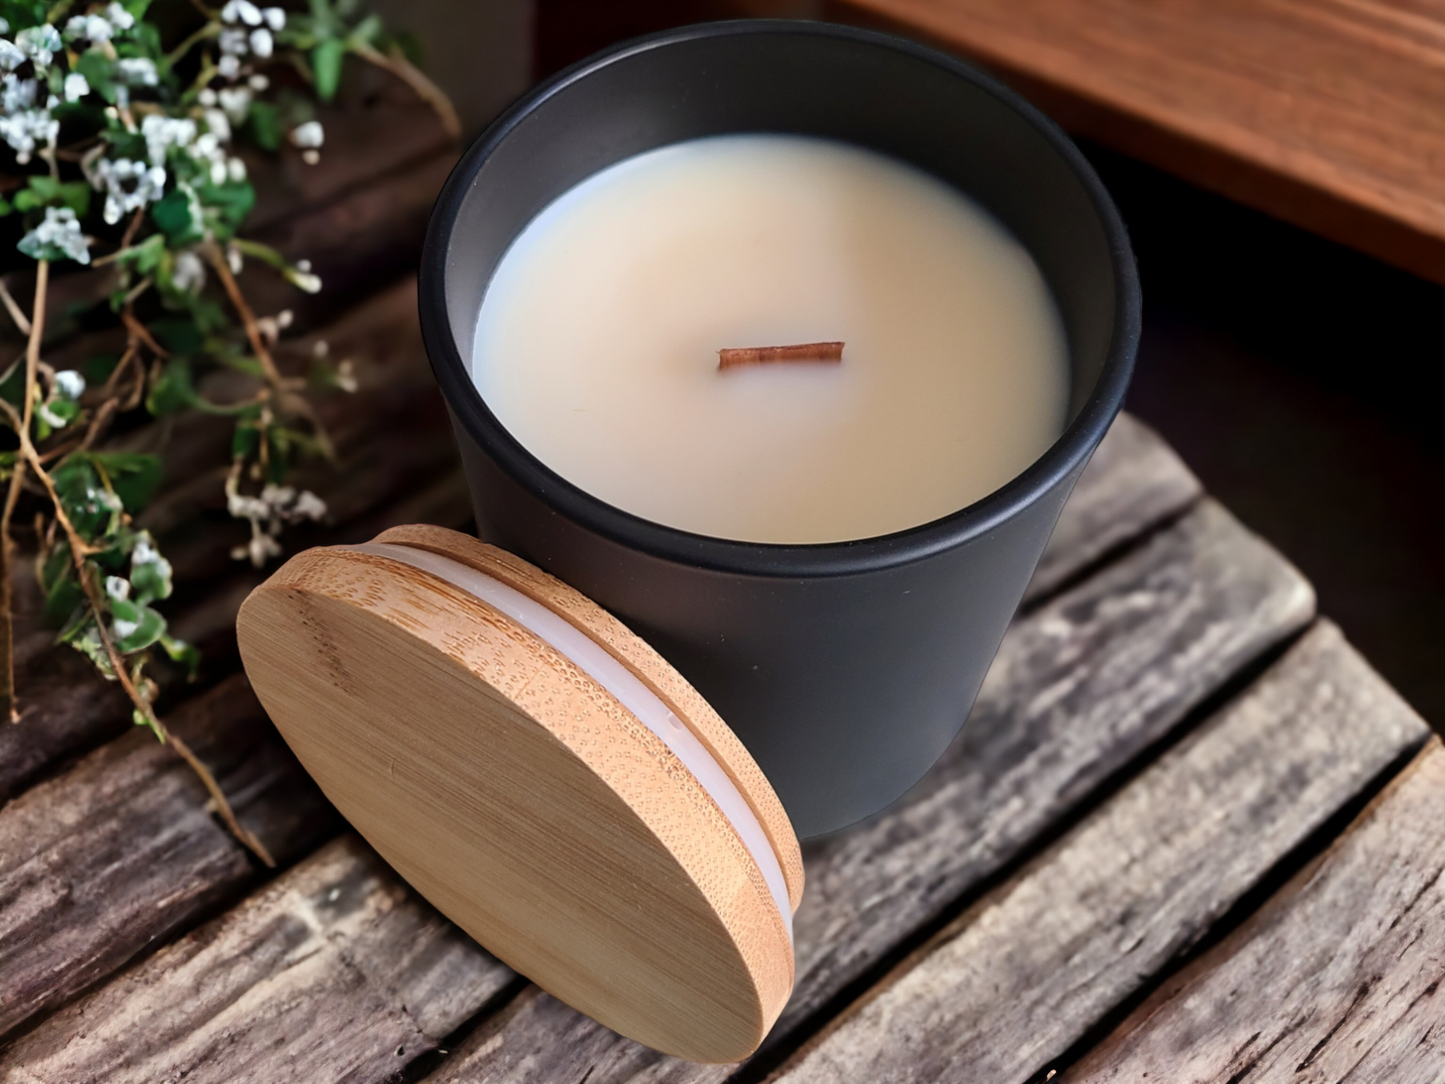 MATTE BLACK GLASS CANDLE WITH WOOD LID - CHOOSE YOUR FAVORITE SCENT -  Cottage Candle Co (TM)